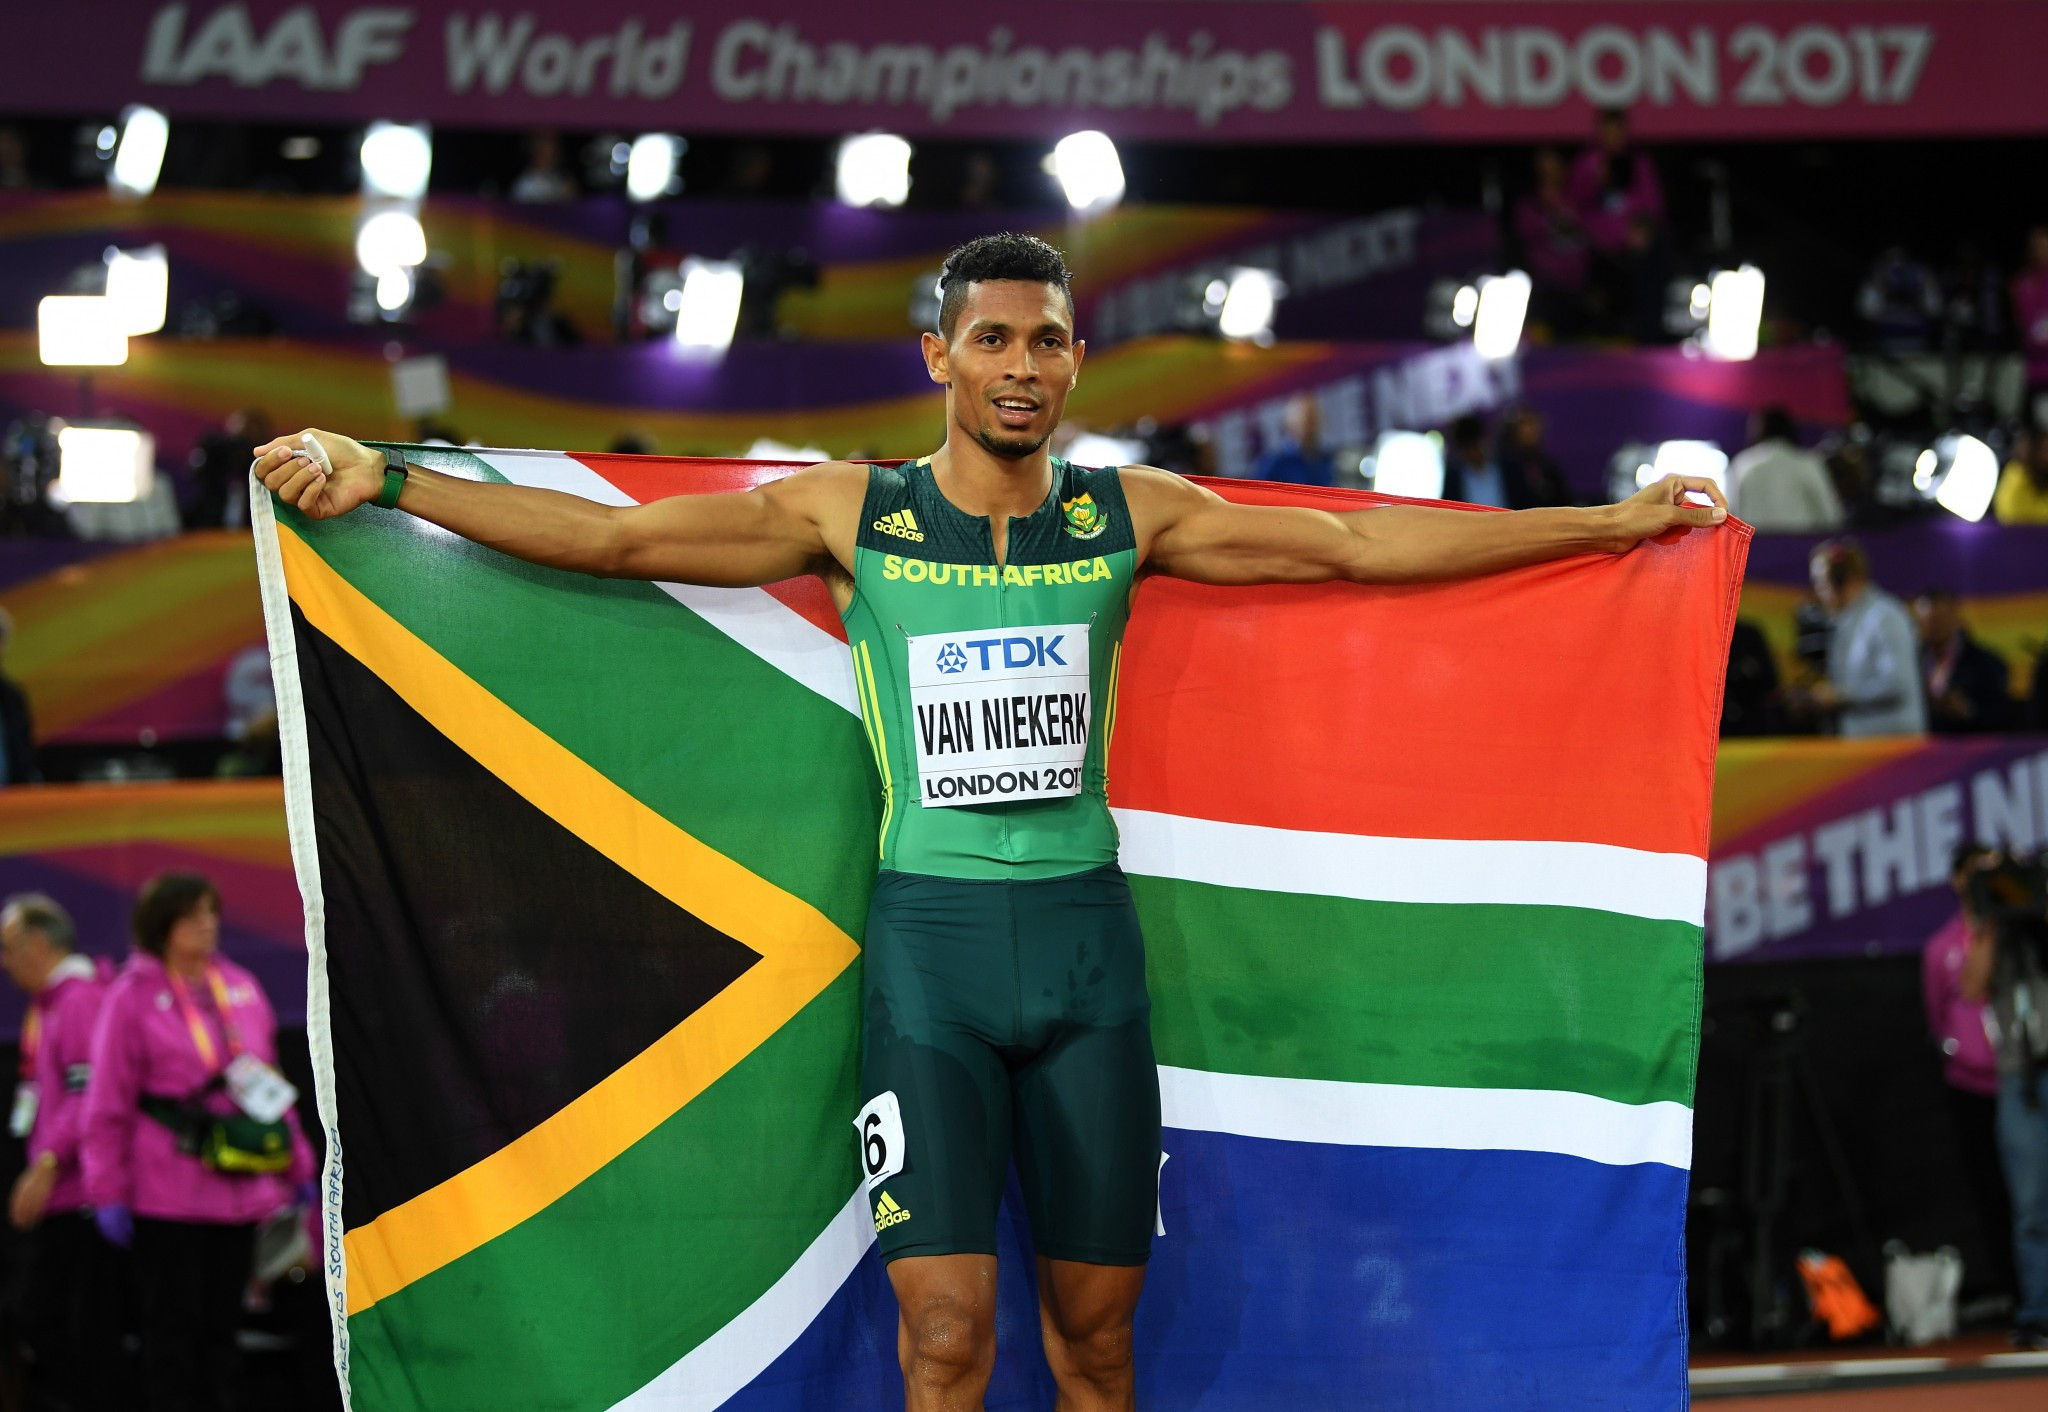 Conseslus Kipruto's positive testing for coronavirus follows the COVID-19 positive announced last week for Olympic 400m champion Wayde Van Niekerk - although the latter has now been labelled a 